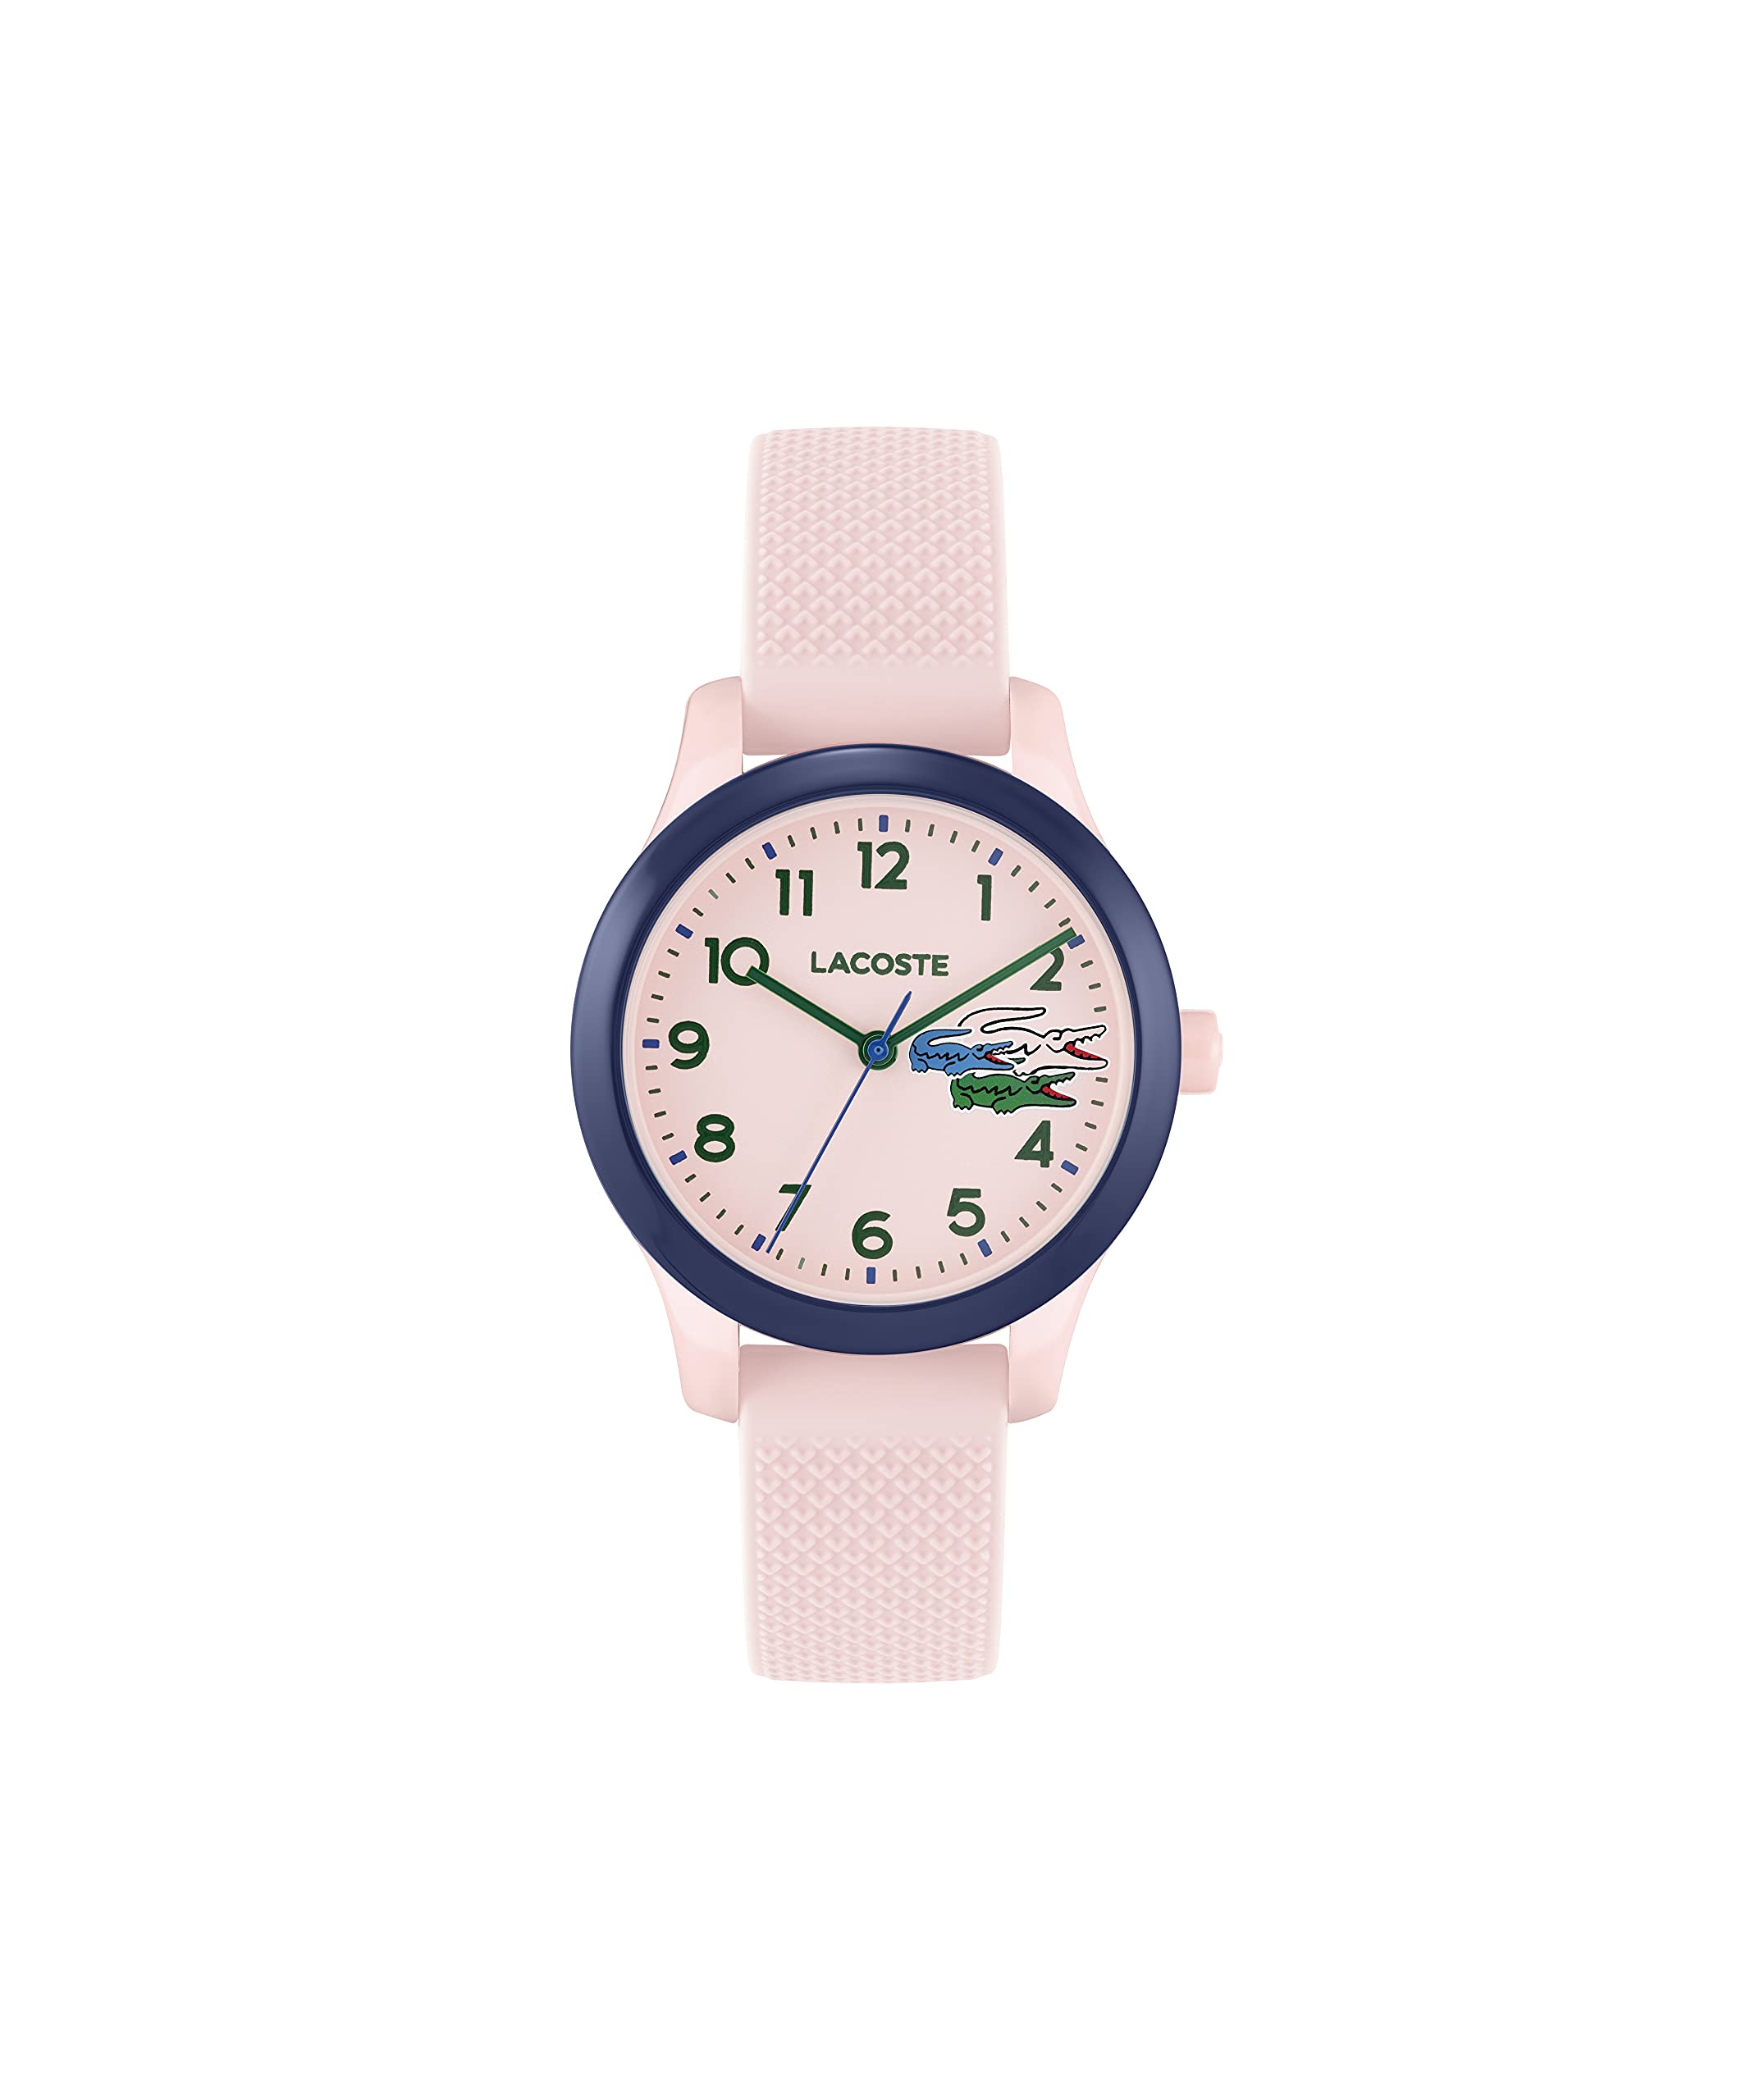 Lacoste Kids' Quartz Watch with Silicone Strap, Pink, 14 (Model: 2030036)